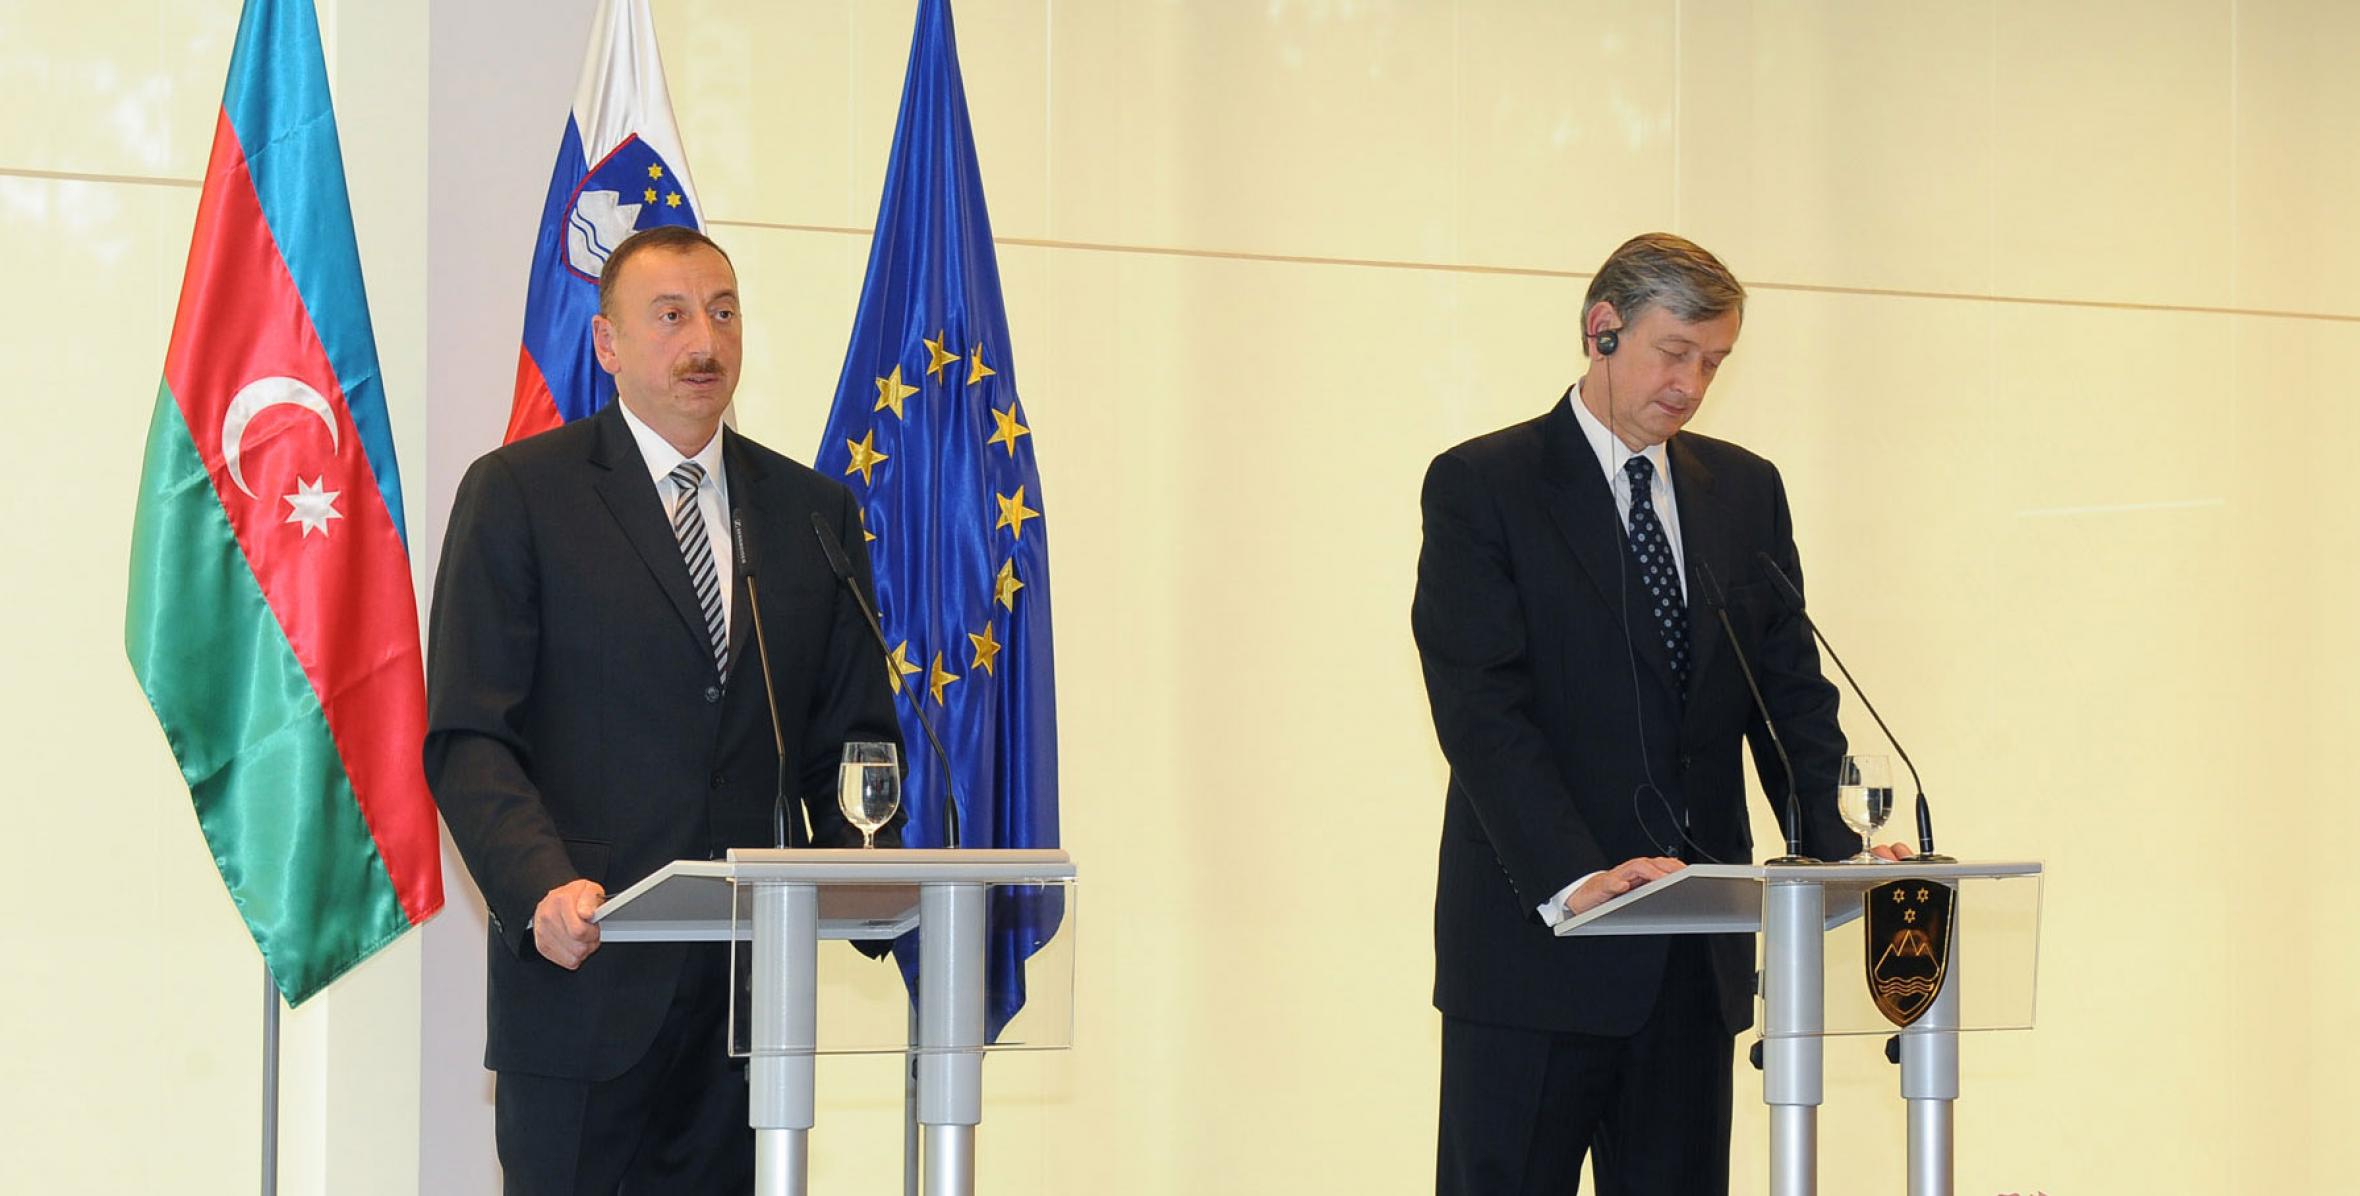 Joint press conference of Azerbaijani and Slovenian Presidents was held